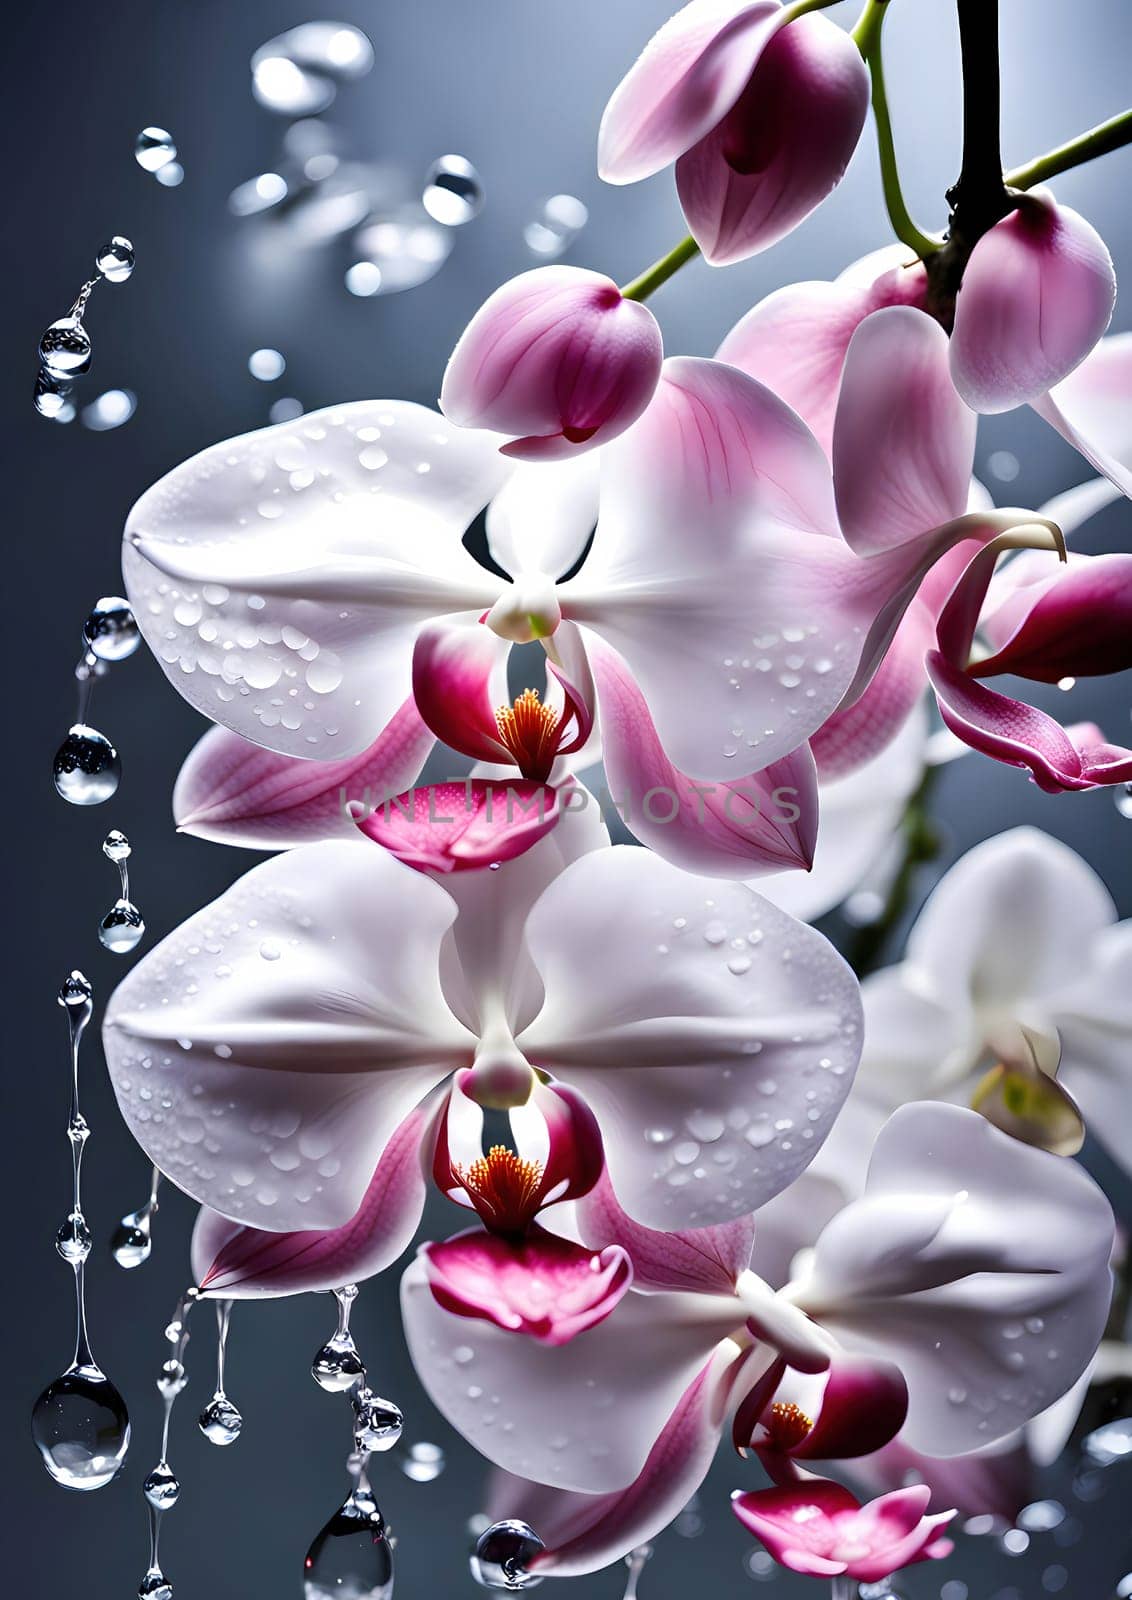 close-up of a bouquet of orchid flowers, gray-blue background, floating liquid, extremely unique beauty, white orchids, there is one cherry, soft light dull mood, dazzling, dew, magnolia, by rostik924